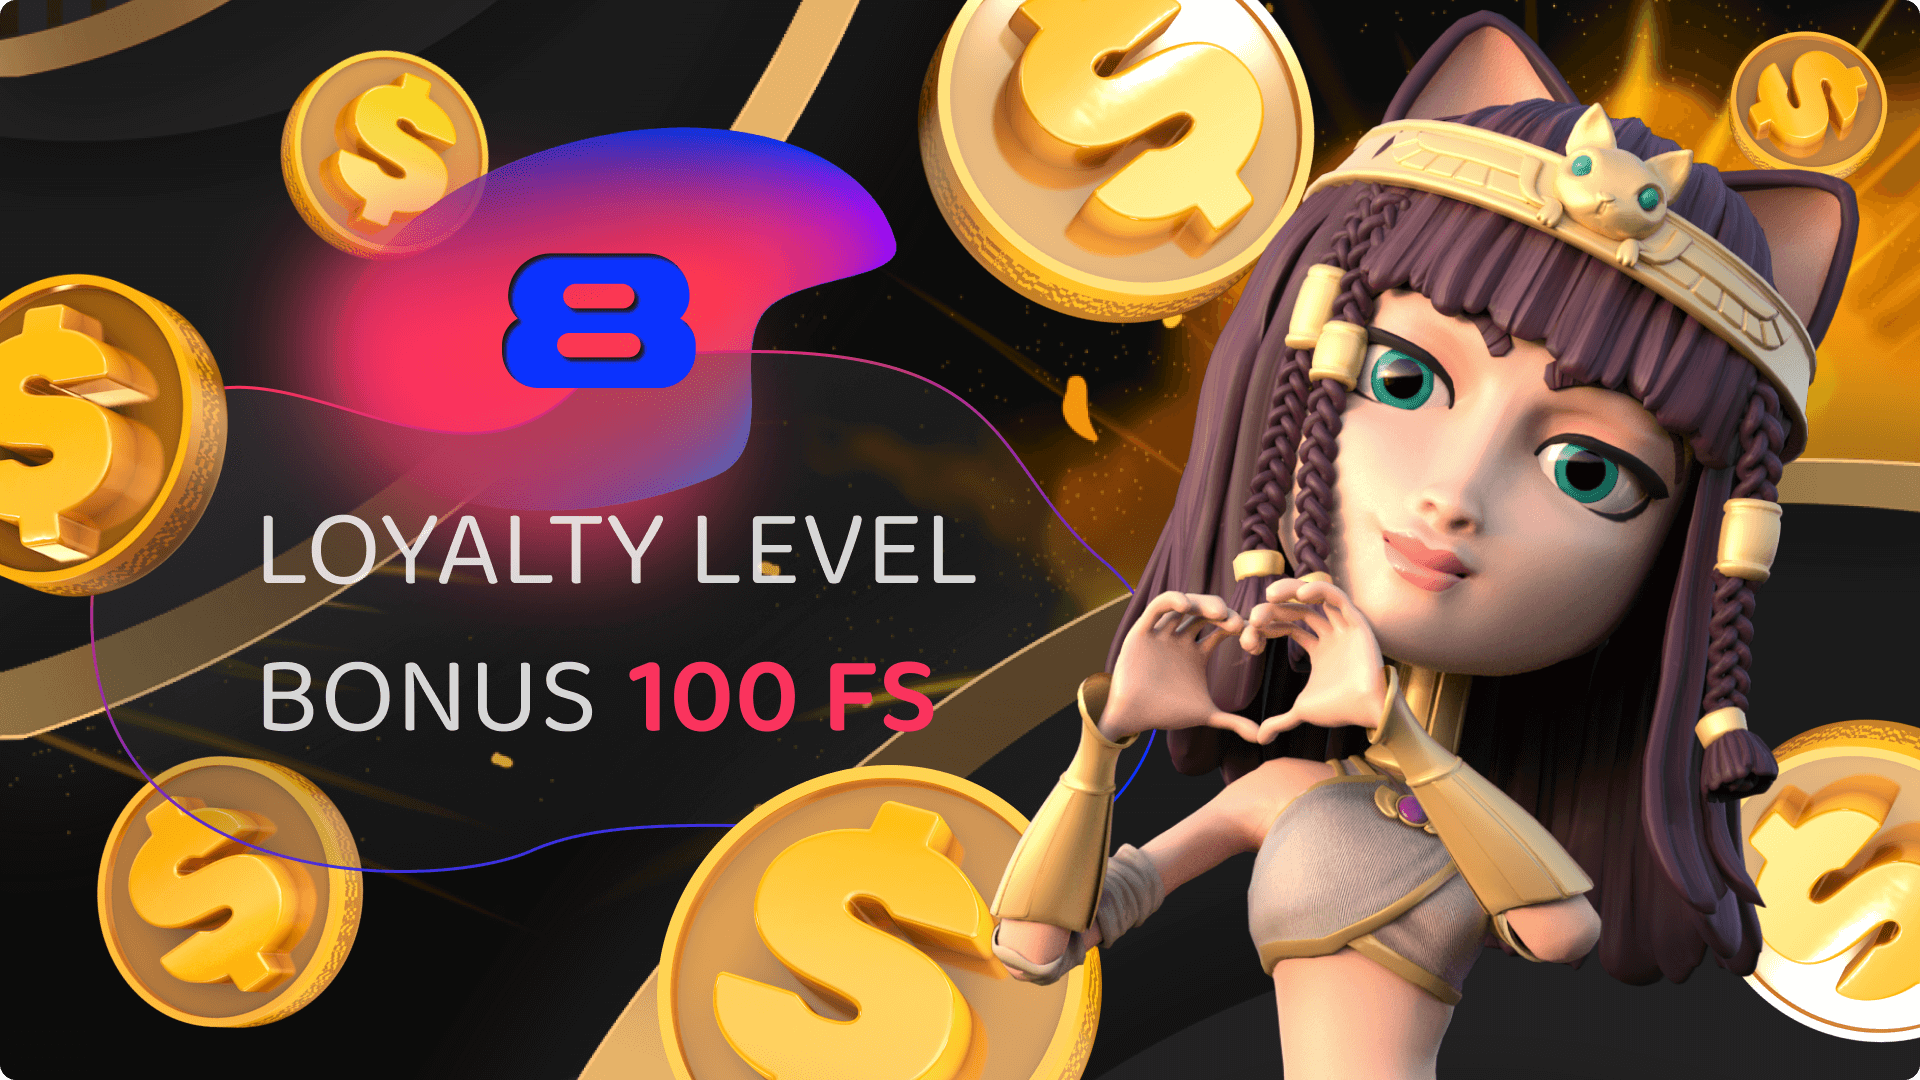 100 FS for 8 loyalty level